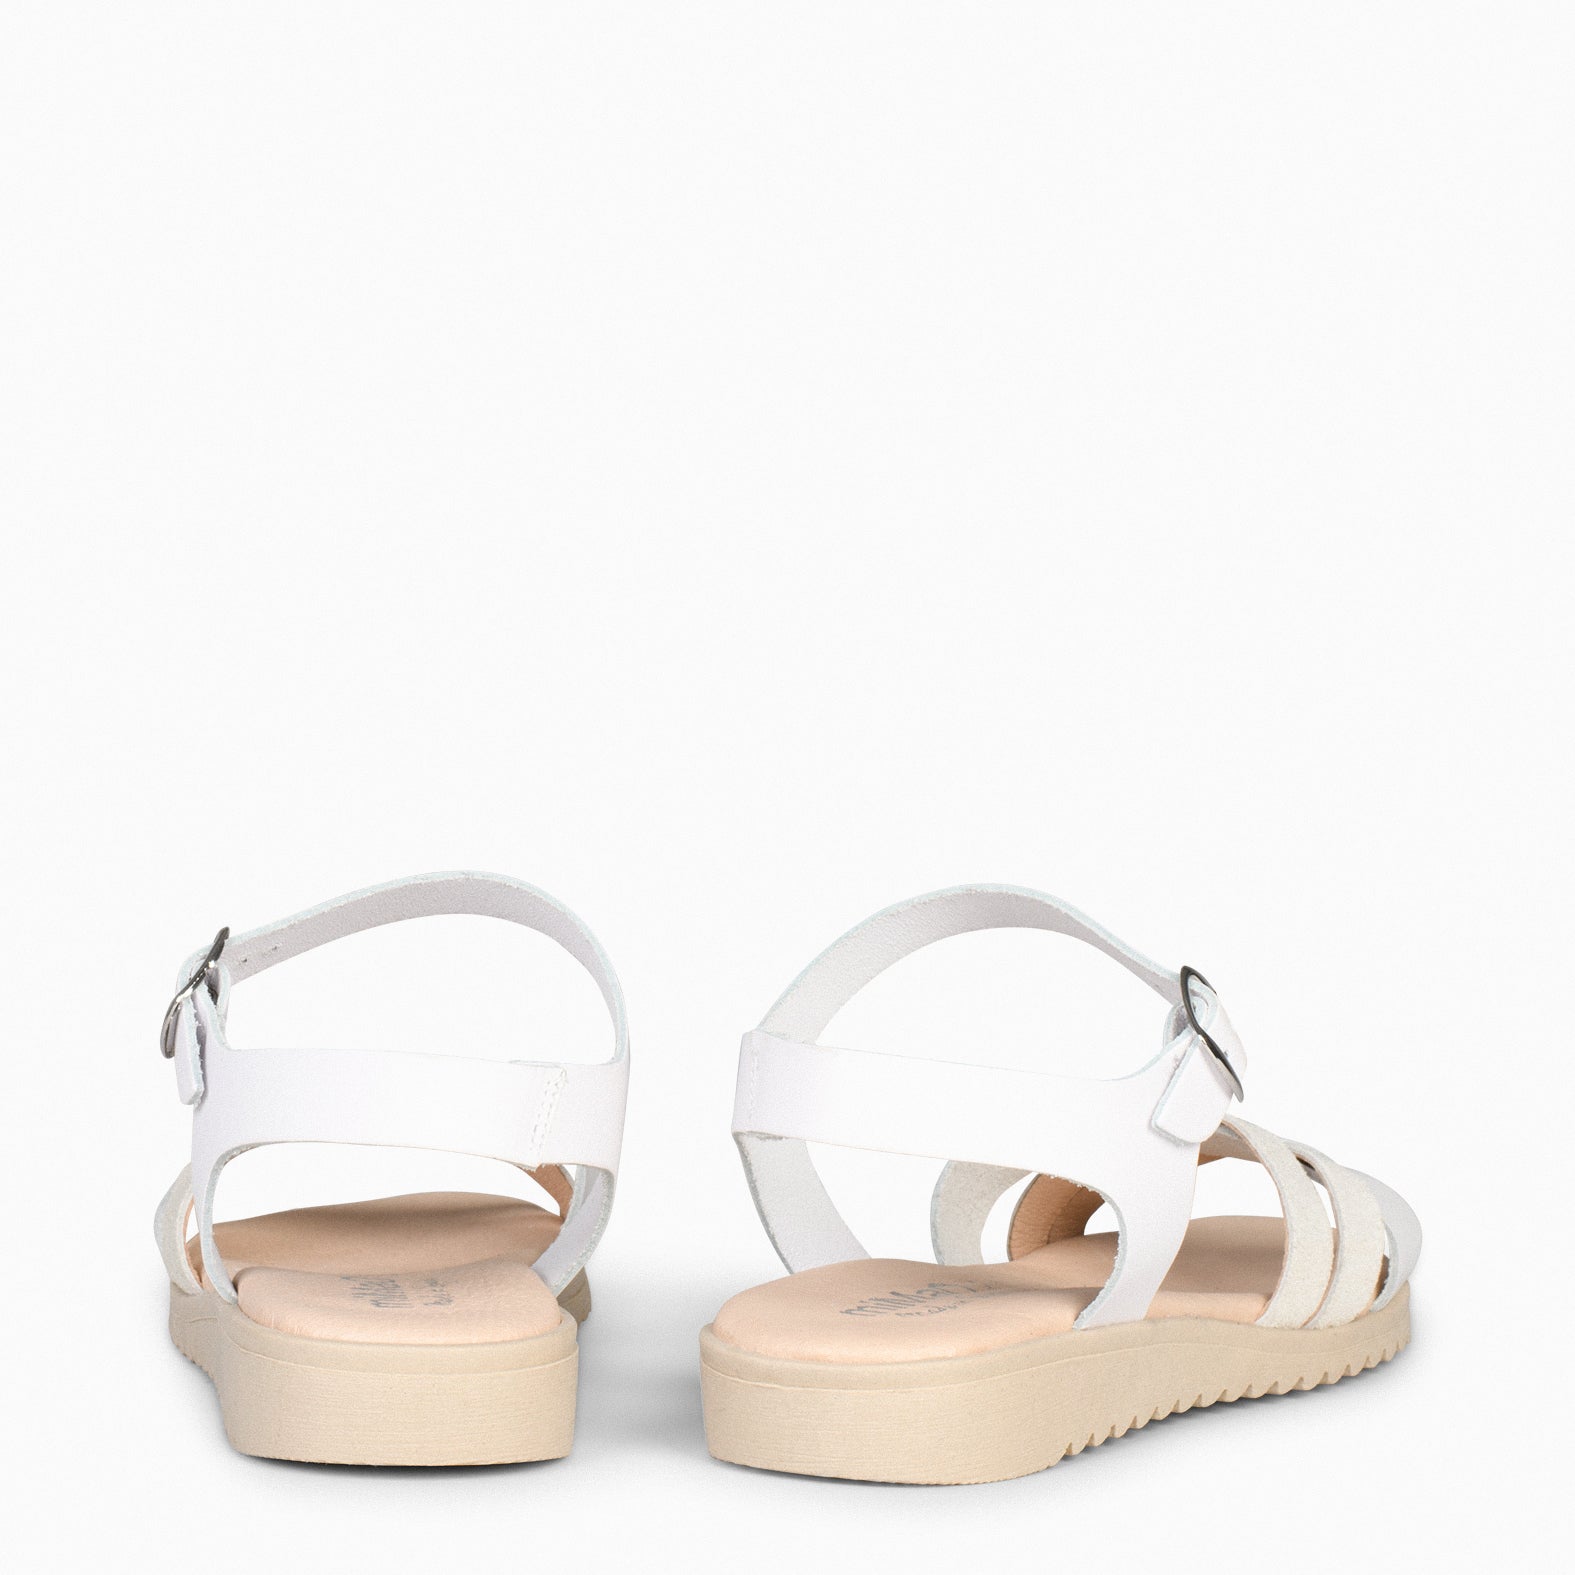 FRESH – WHITE low wedge leather sandals